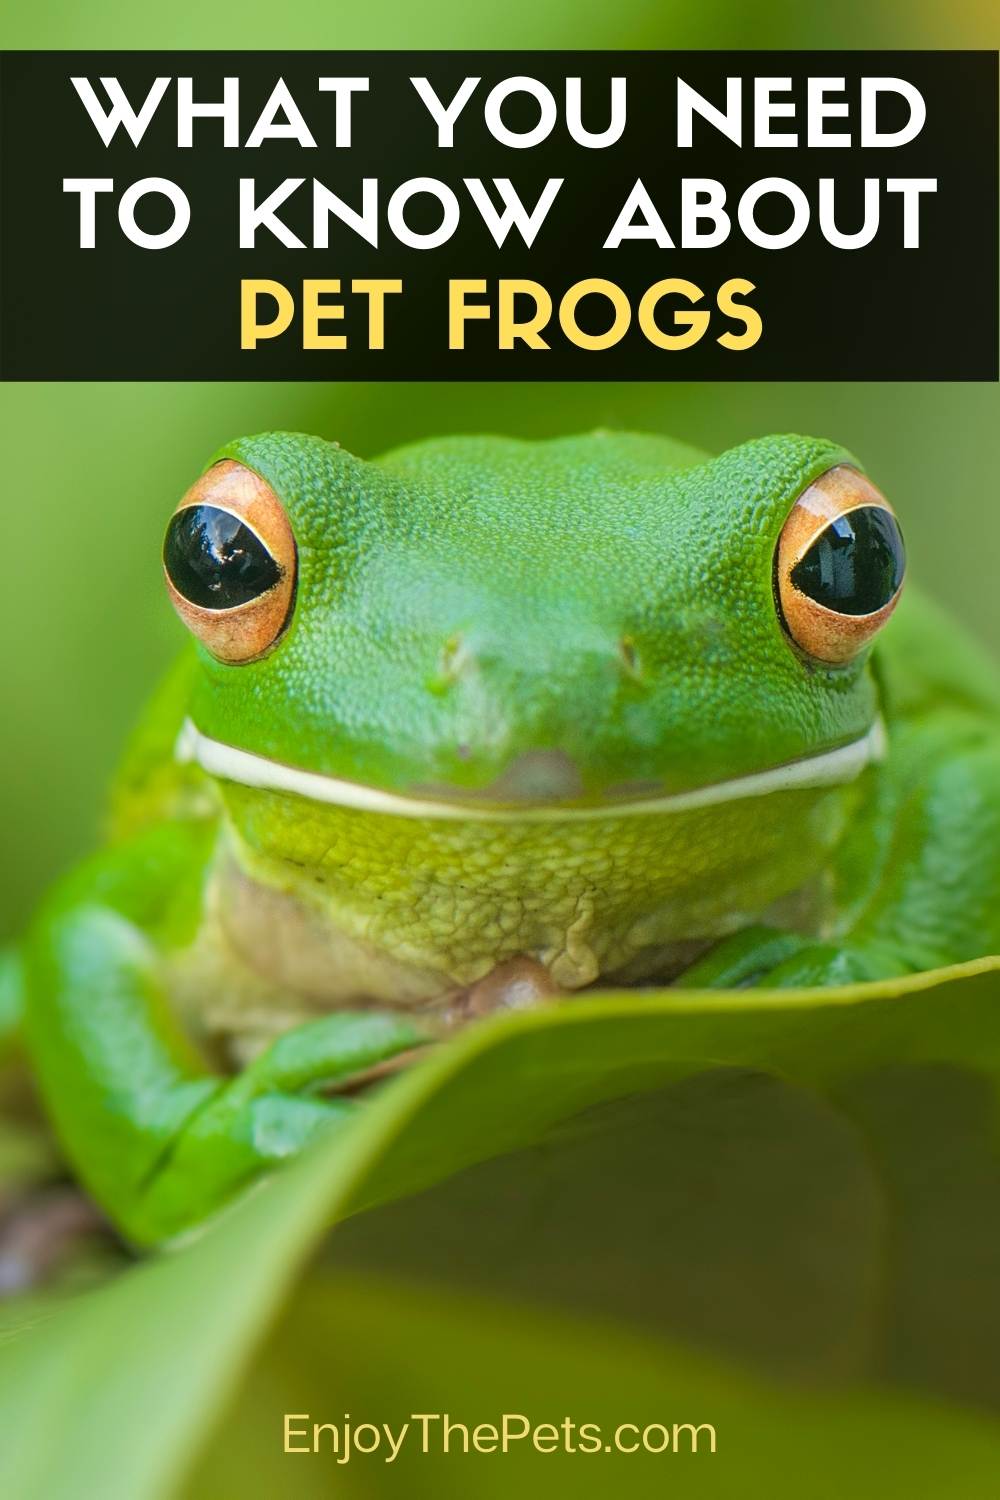 Frogs as Pets